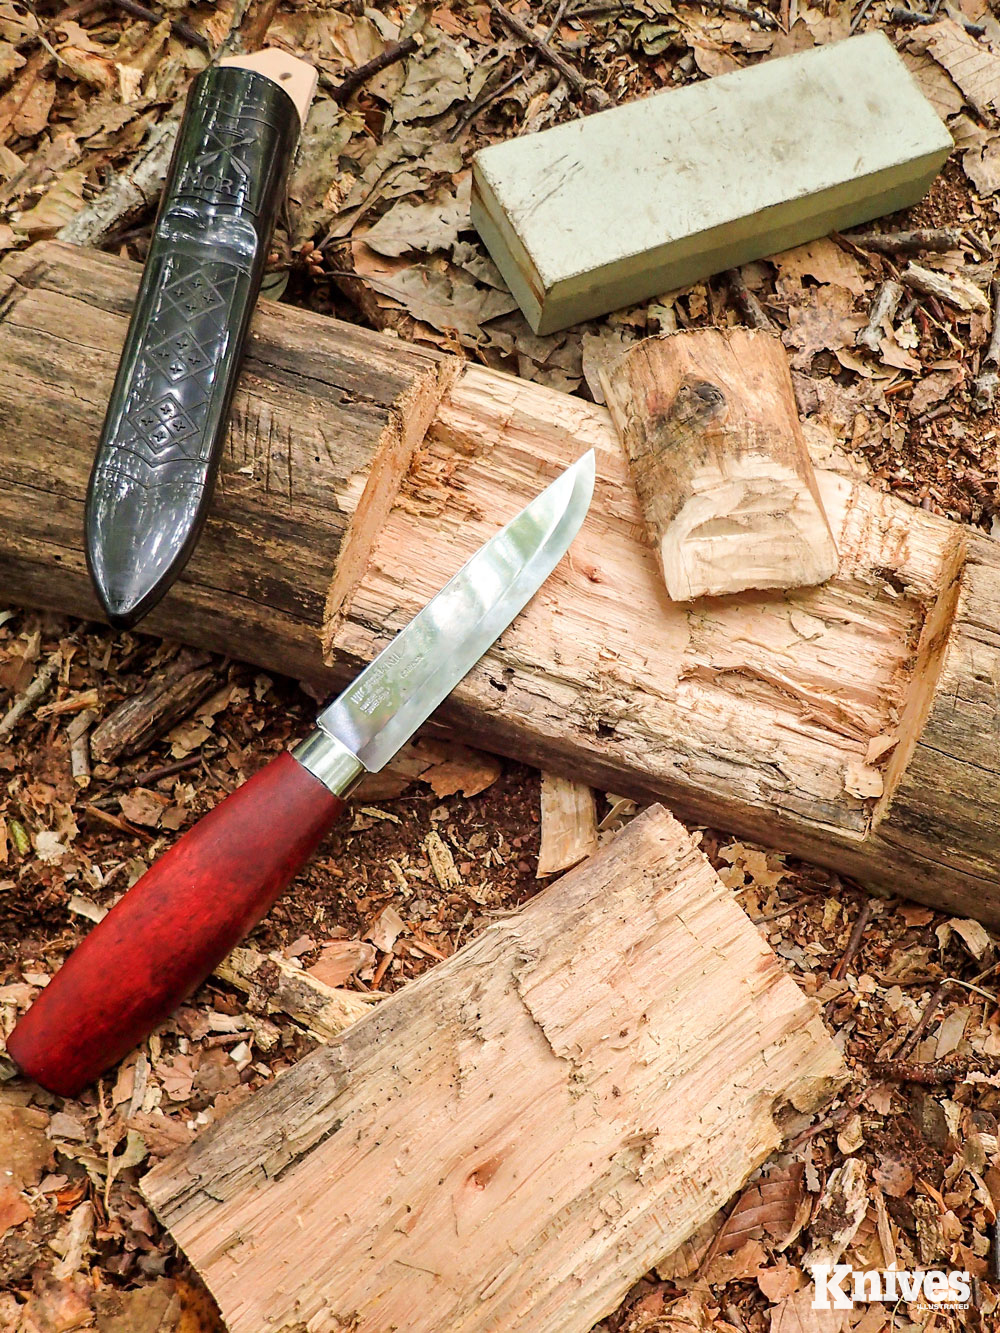 REVIEW: The new updated MORAKNIV CLASSICS, the timeless bushcraft